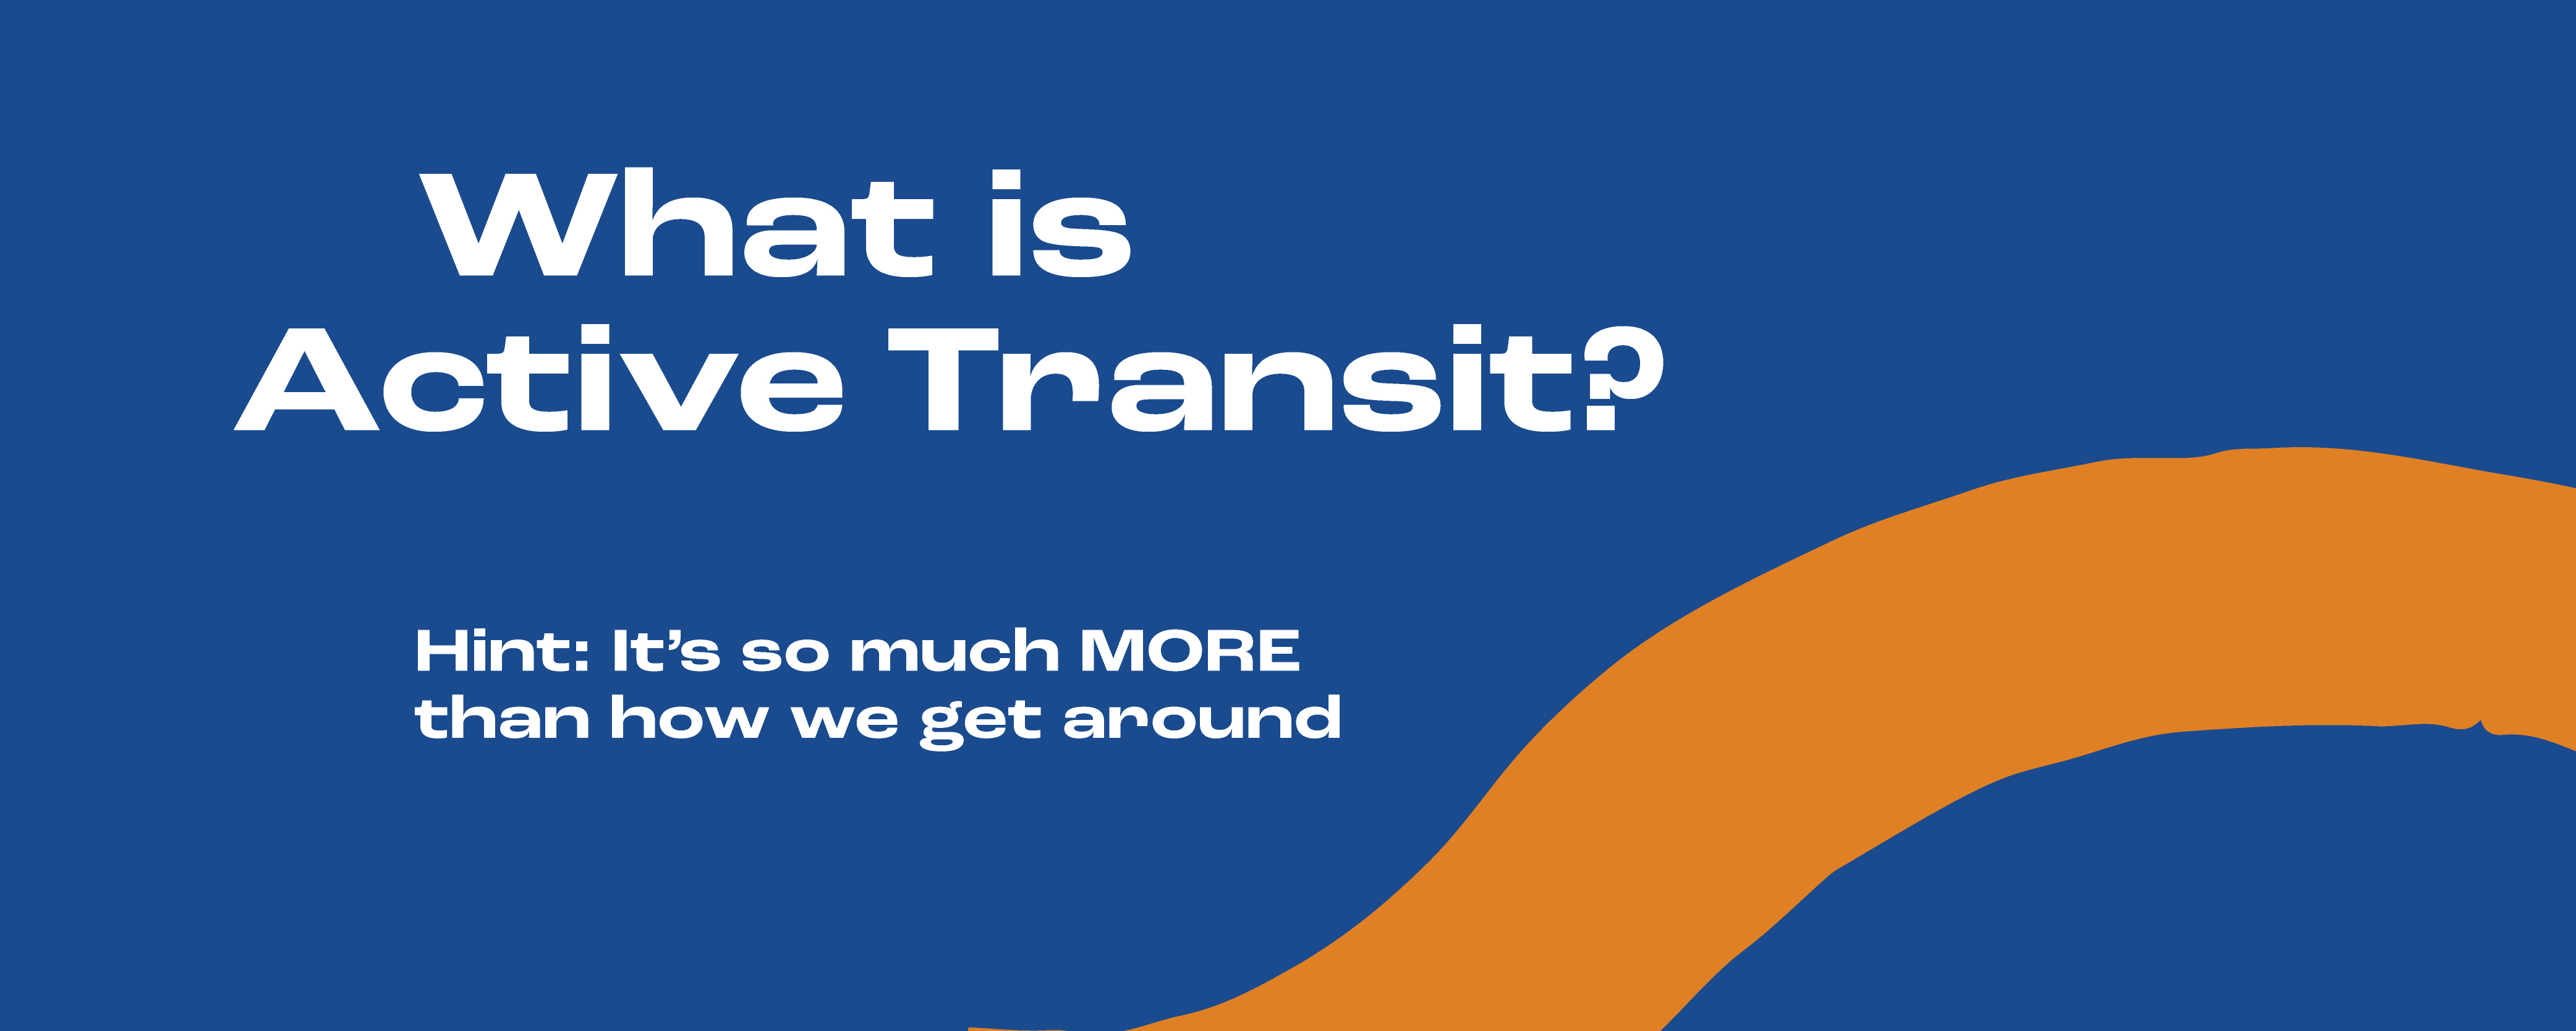 What is Active Transit?